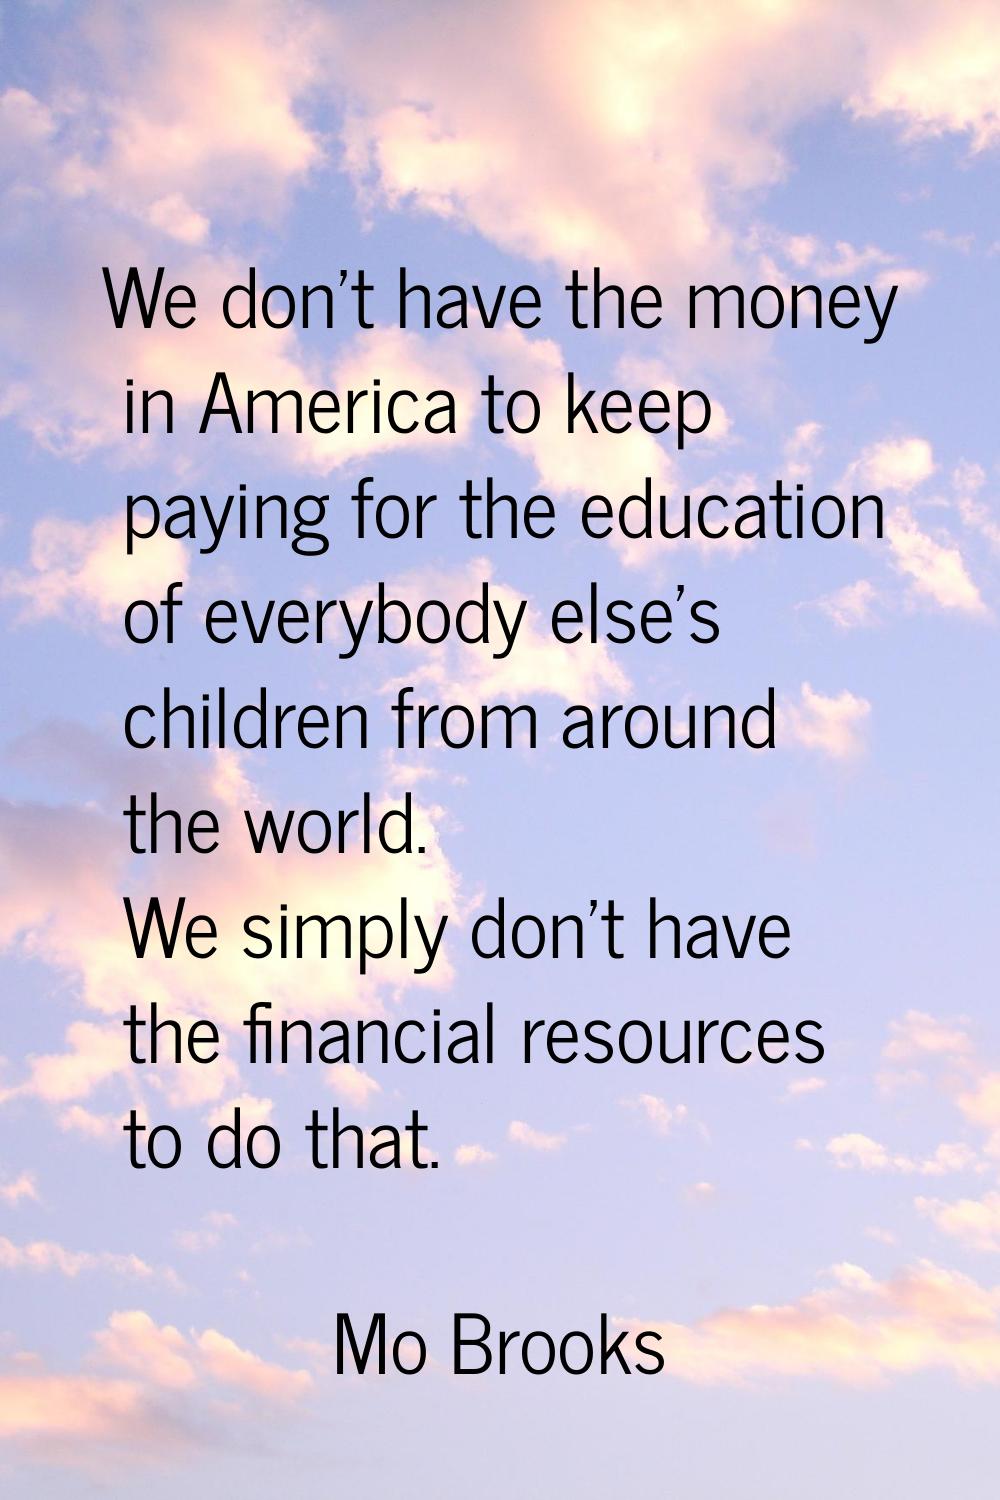 We don't have the money in America to keep paying for the education of everybody else's children fr